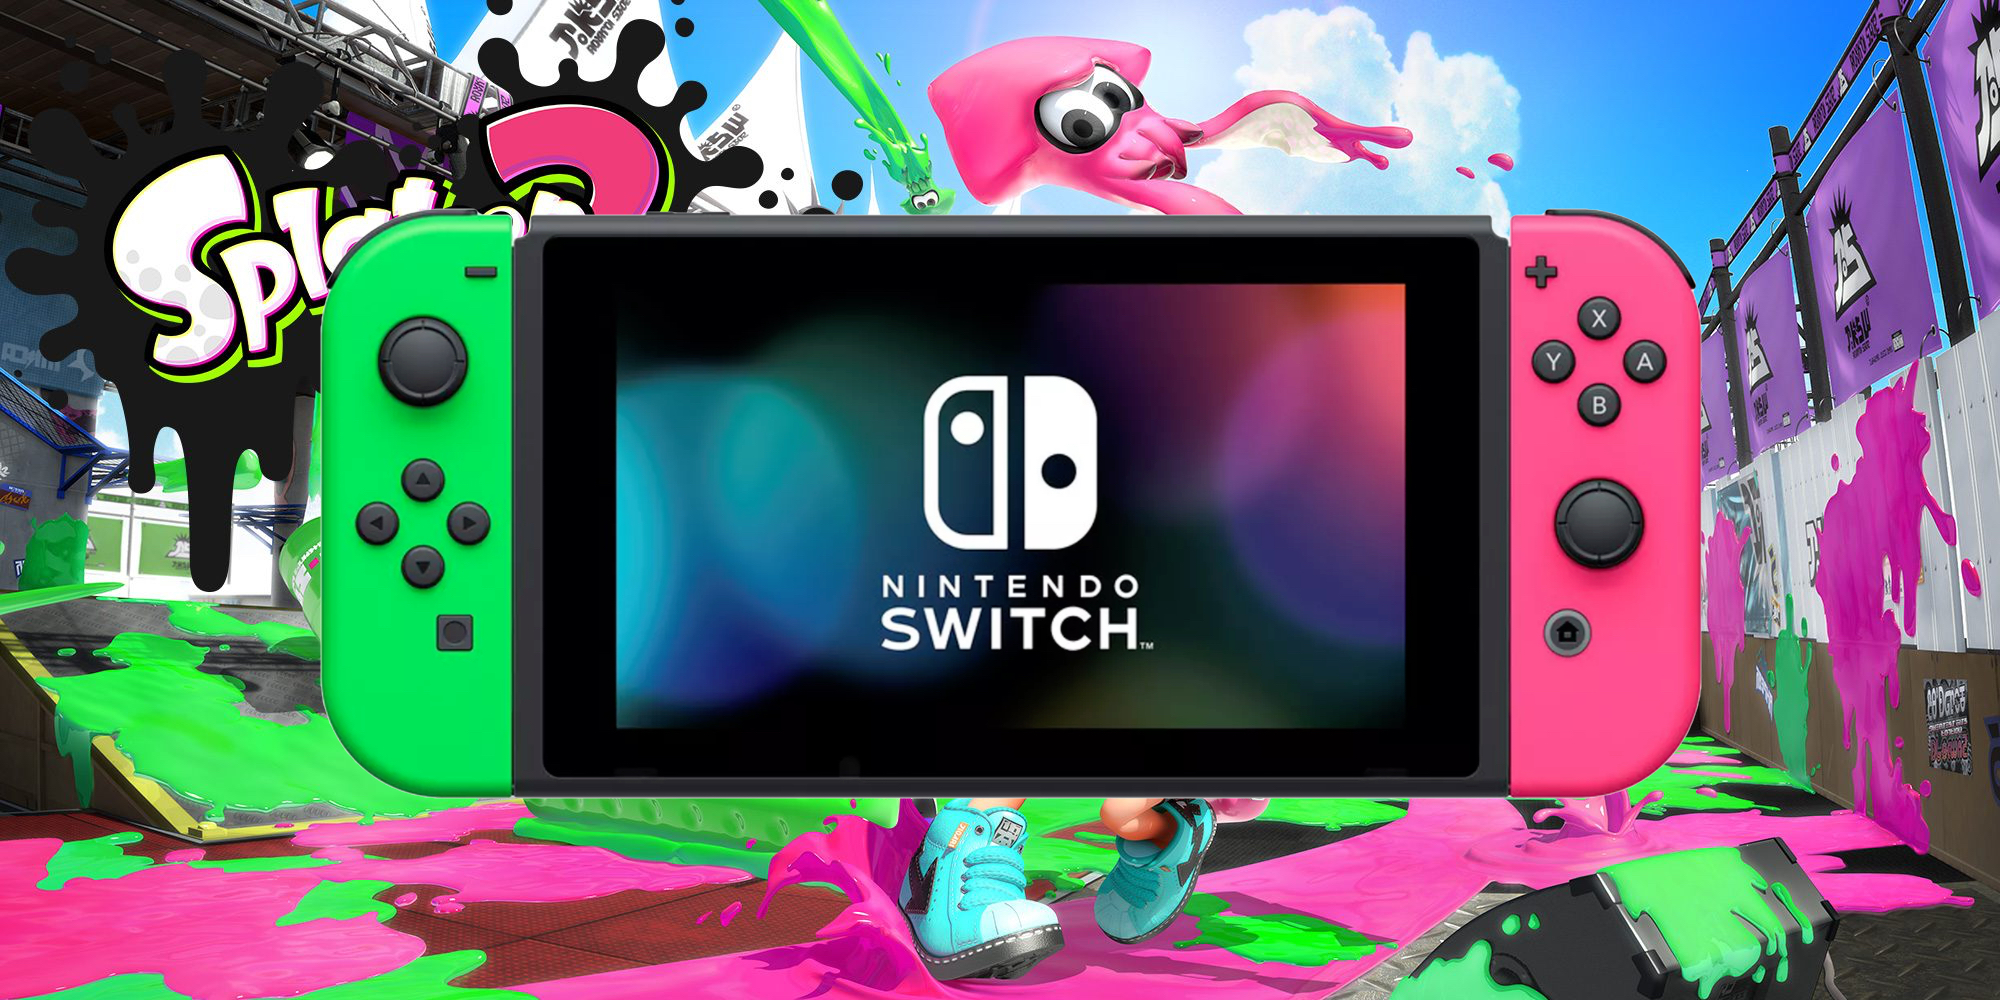 Nintendo's Splatoon bundle makes a comeback with 90-day Switch trial